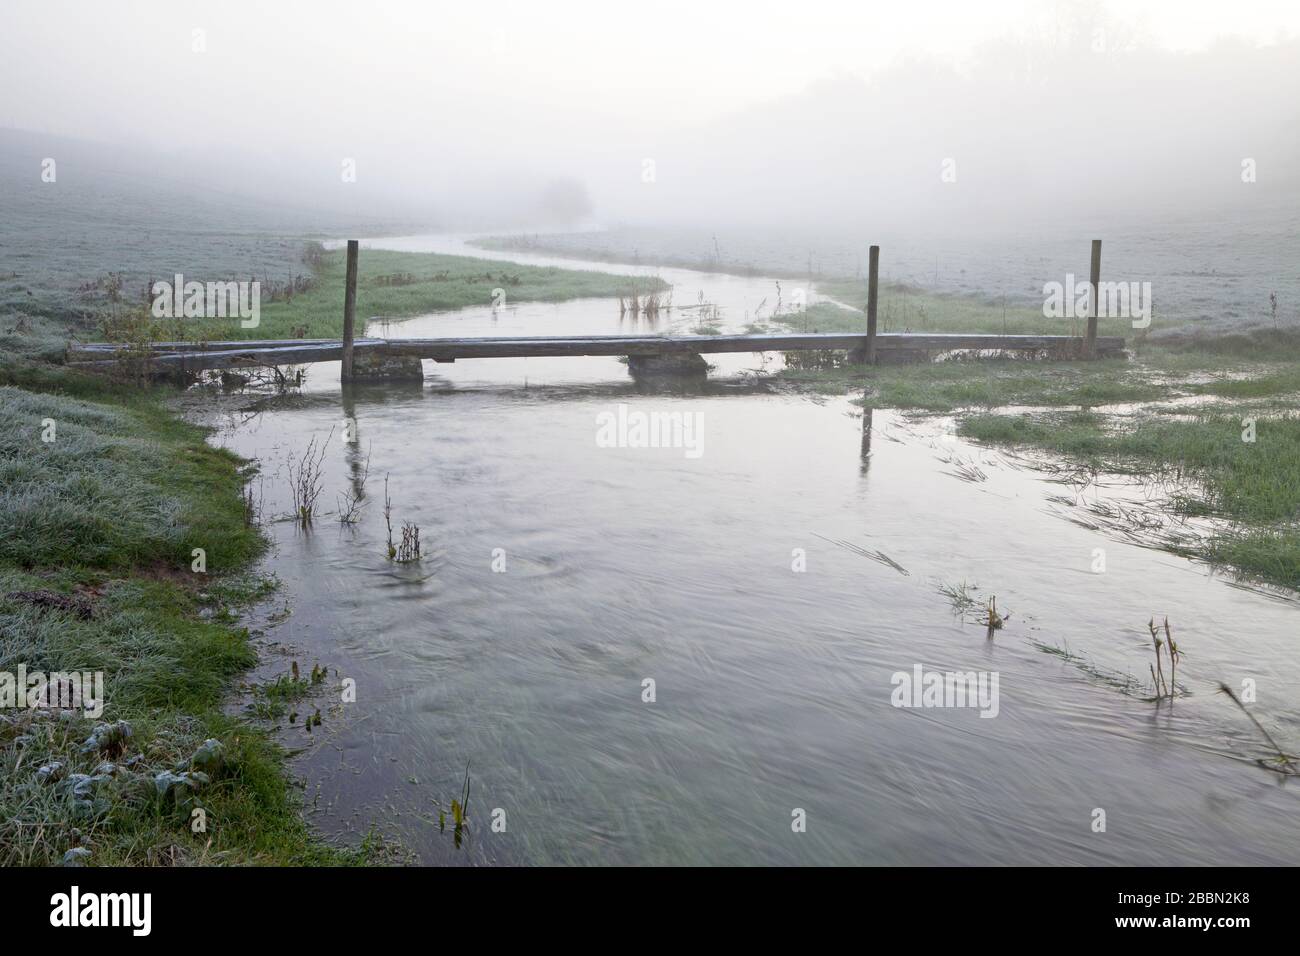 A footbridge on the River Ebble in the village of Fifield Bavant in Wiltshire. Stock Photo